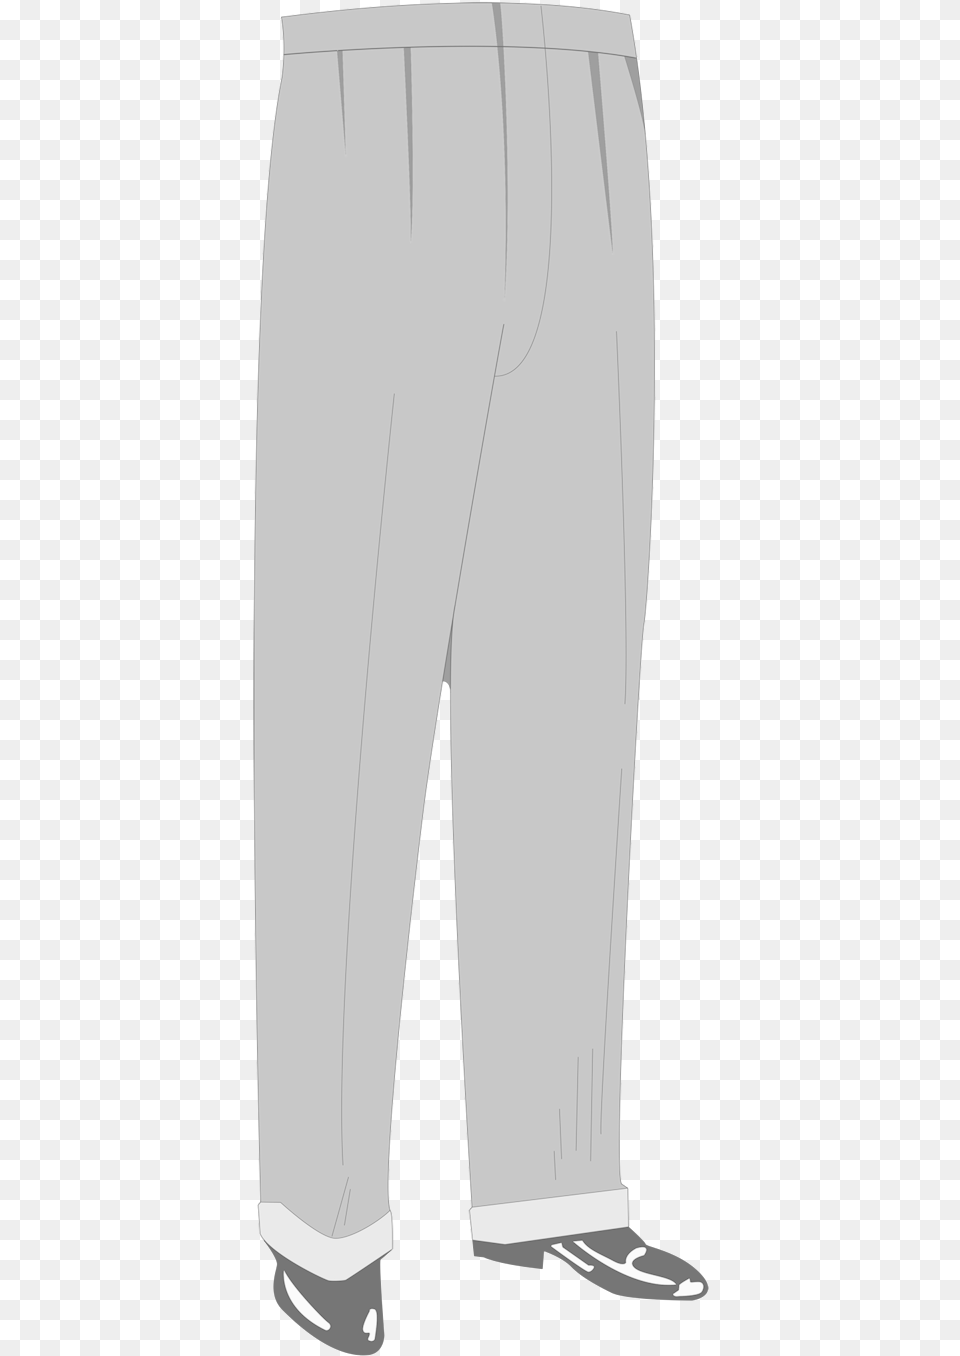 Trousers, Clothing, Pants, Shorts Png Image